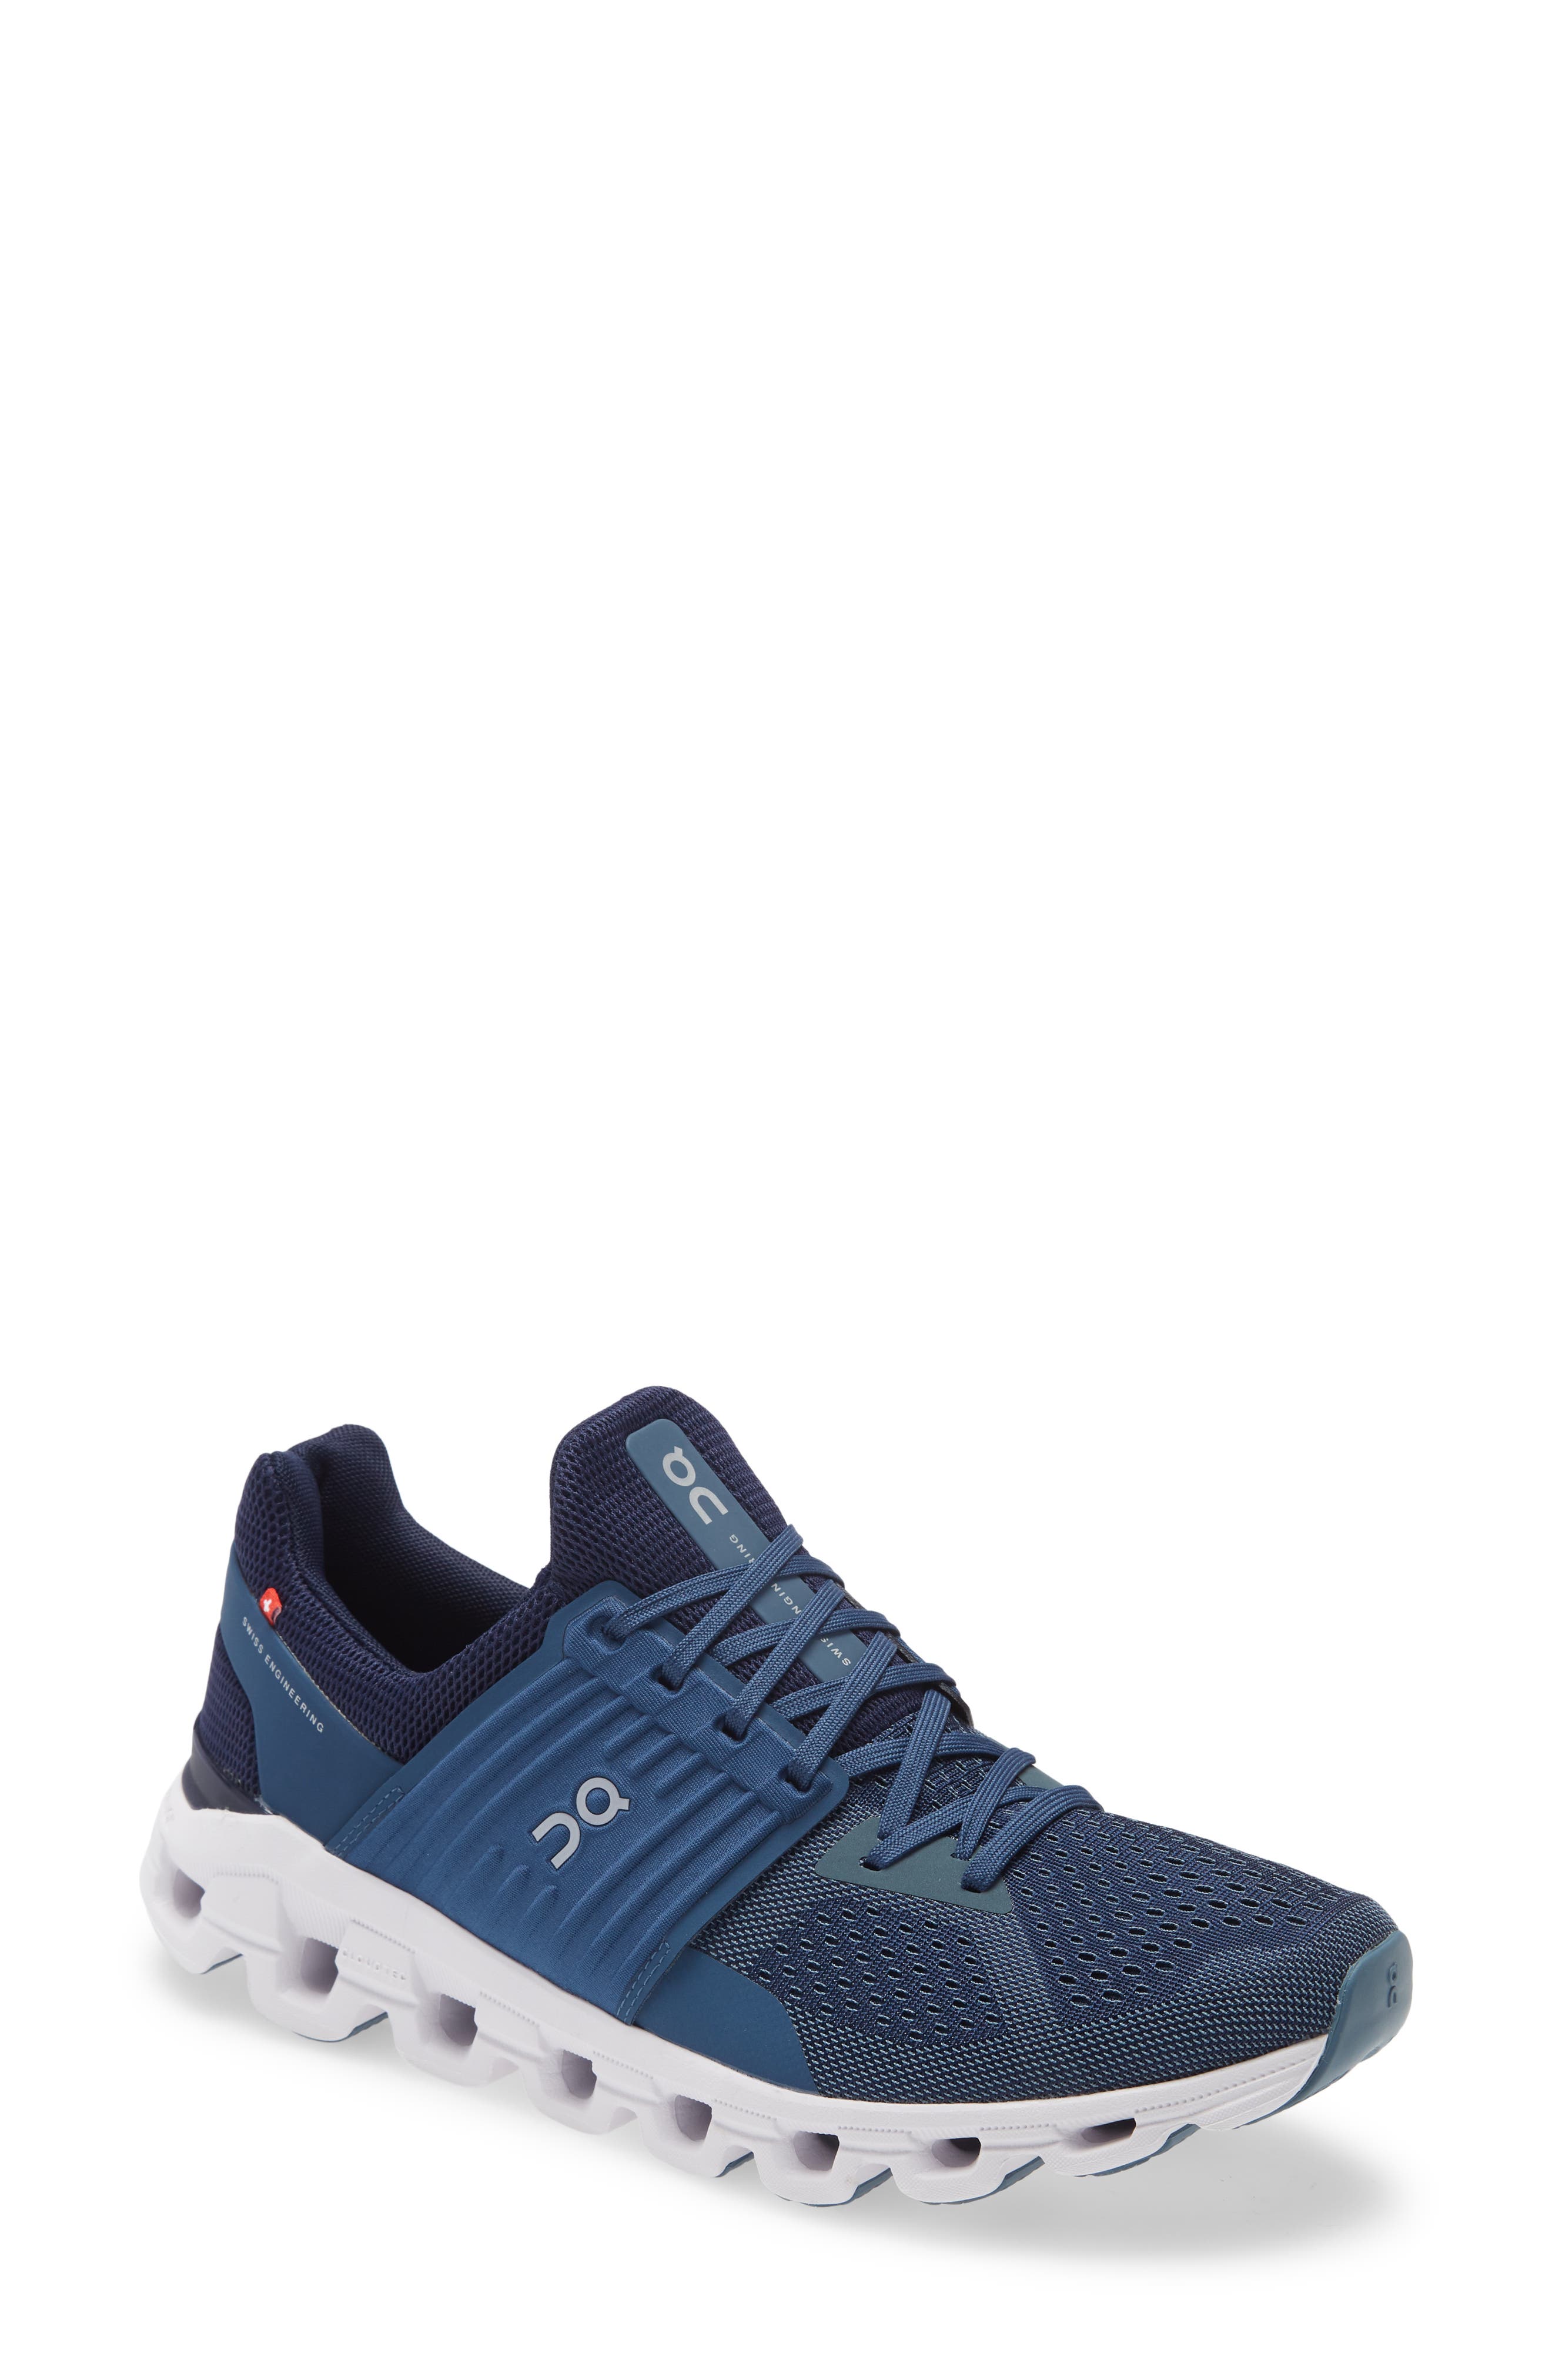 mens running shoes blue